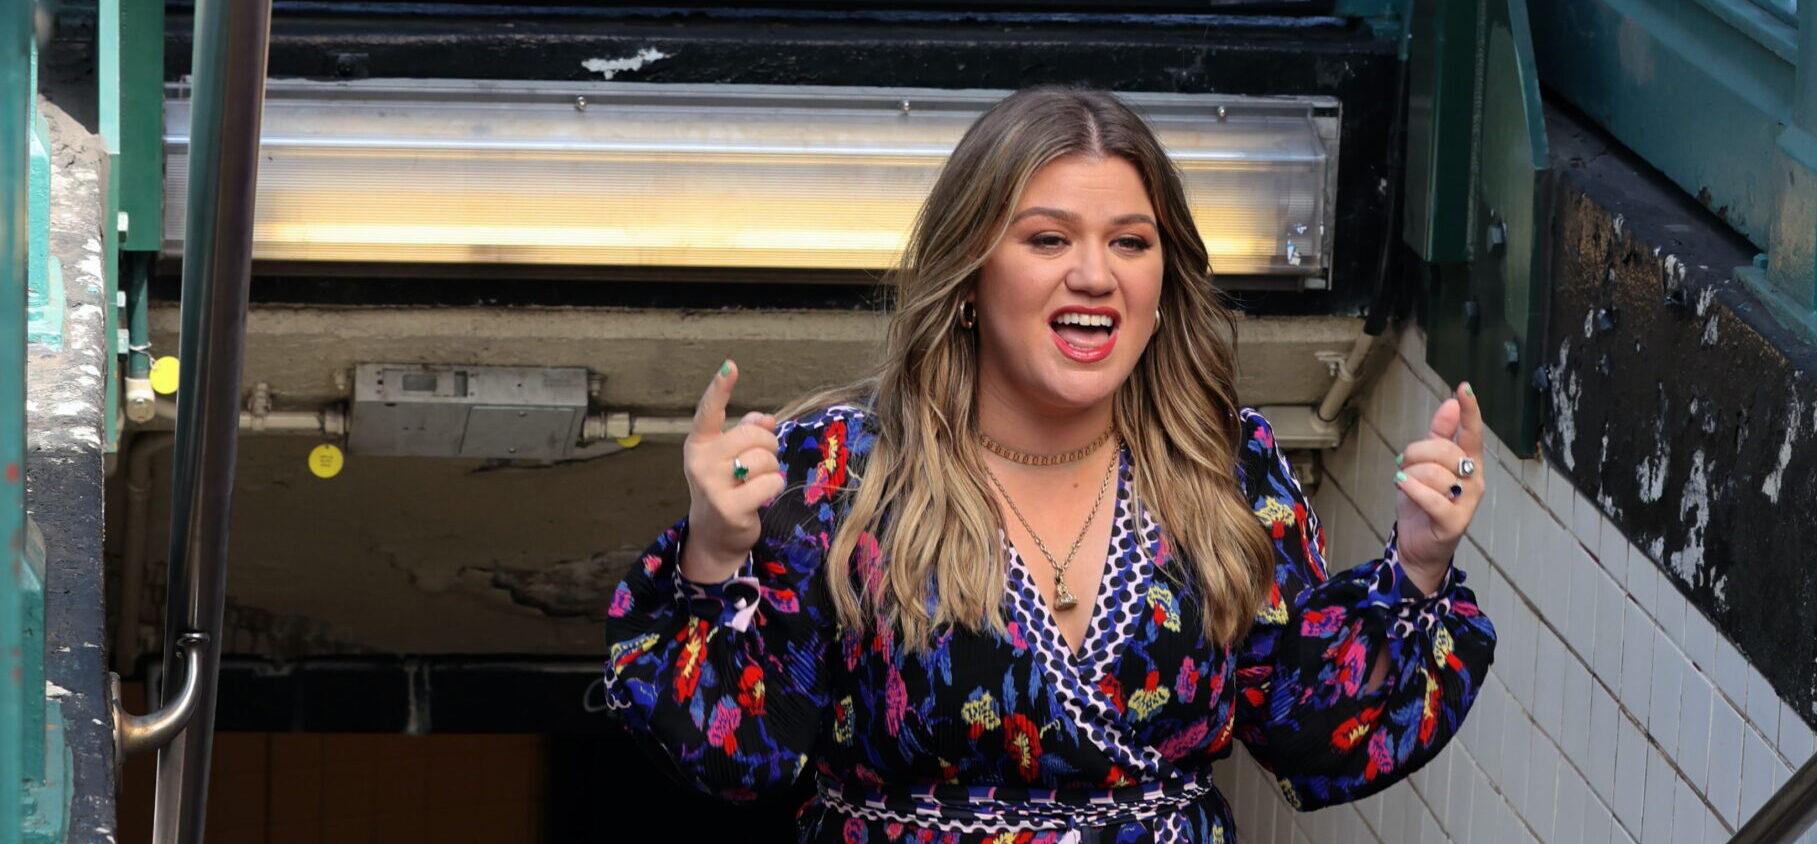 NBCUniversal Denies Claims Of An Alleged ‘Toxic’ Work Environment On ‘The Kelly Clarkson Show’